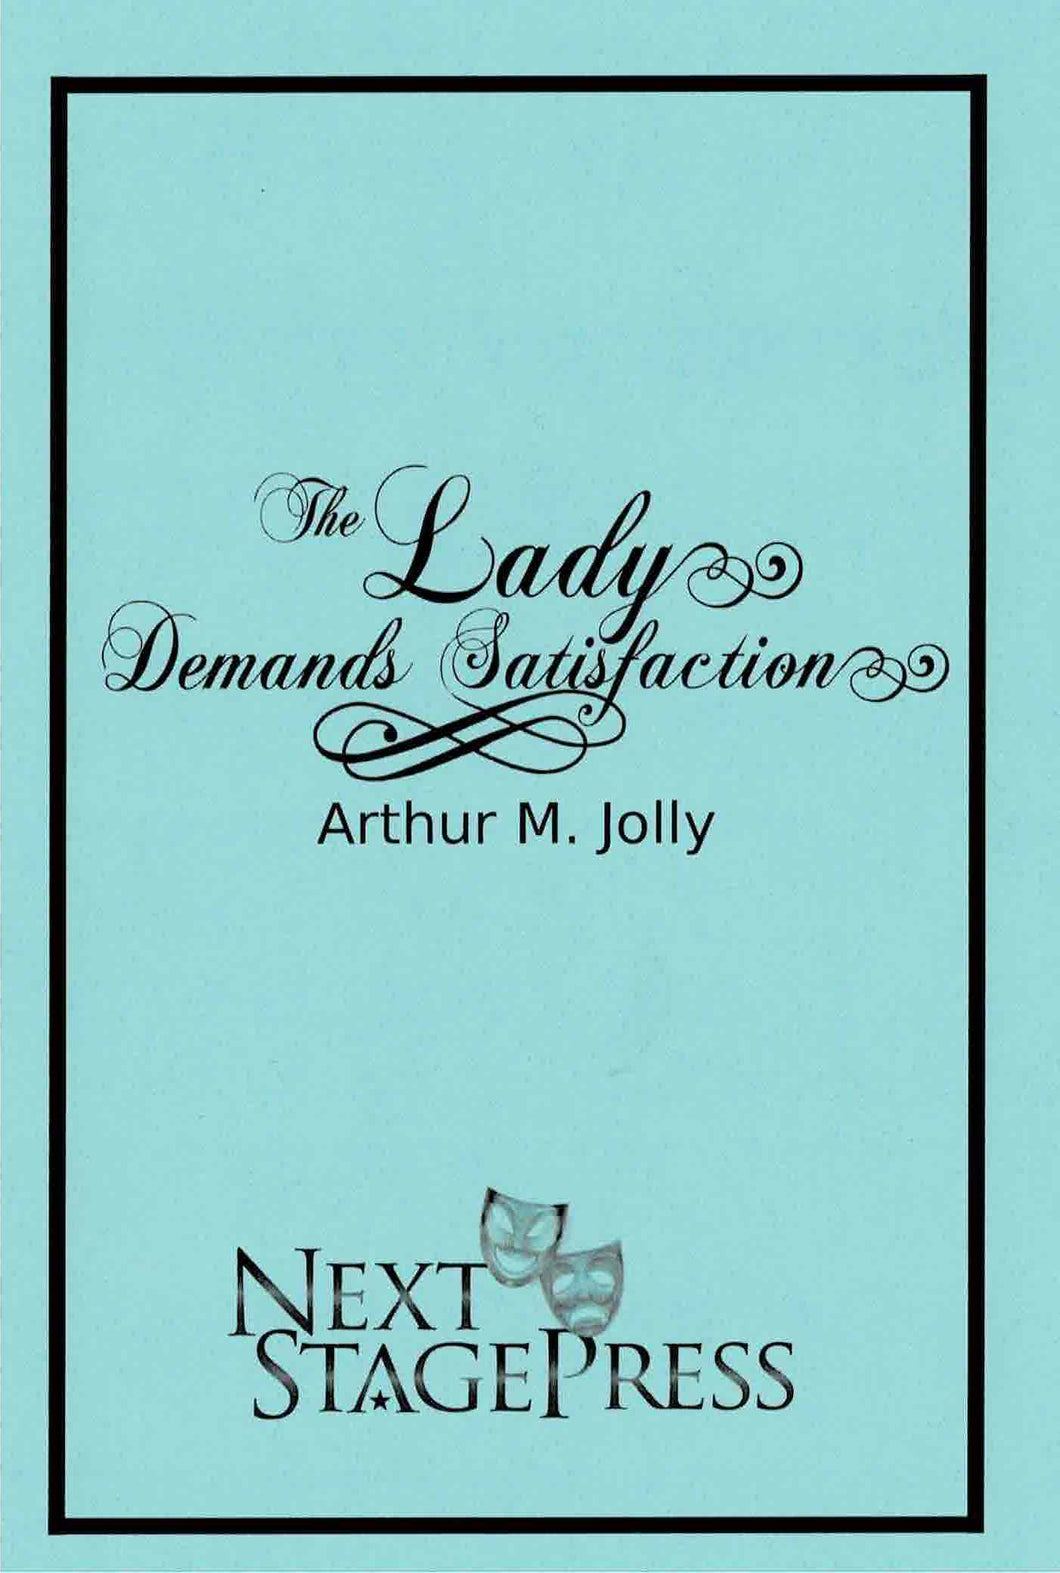 The Lady Demands Satisfaction by Arthur M. Jolly - Digital Version